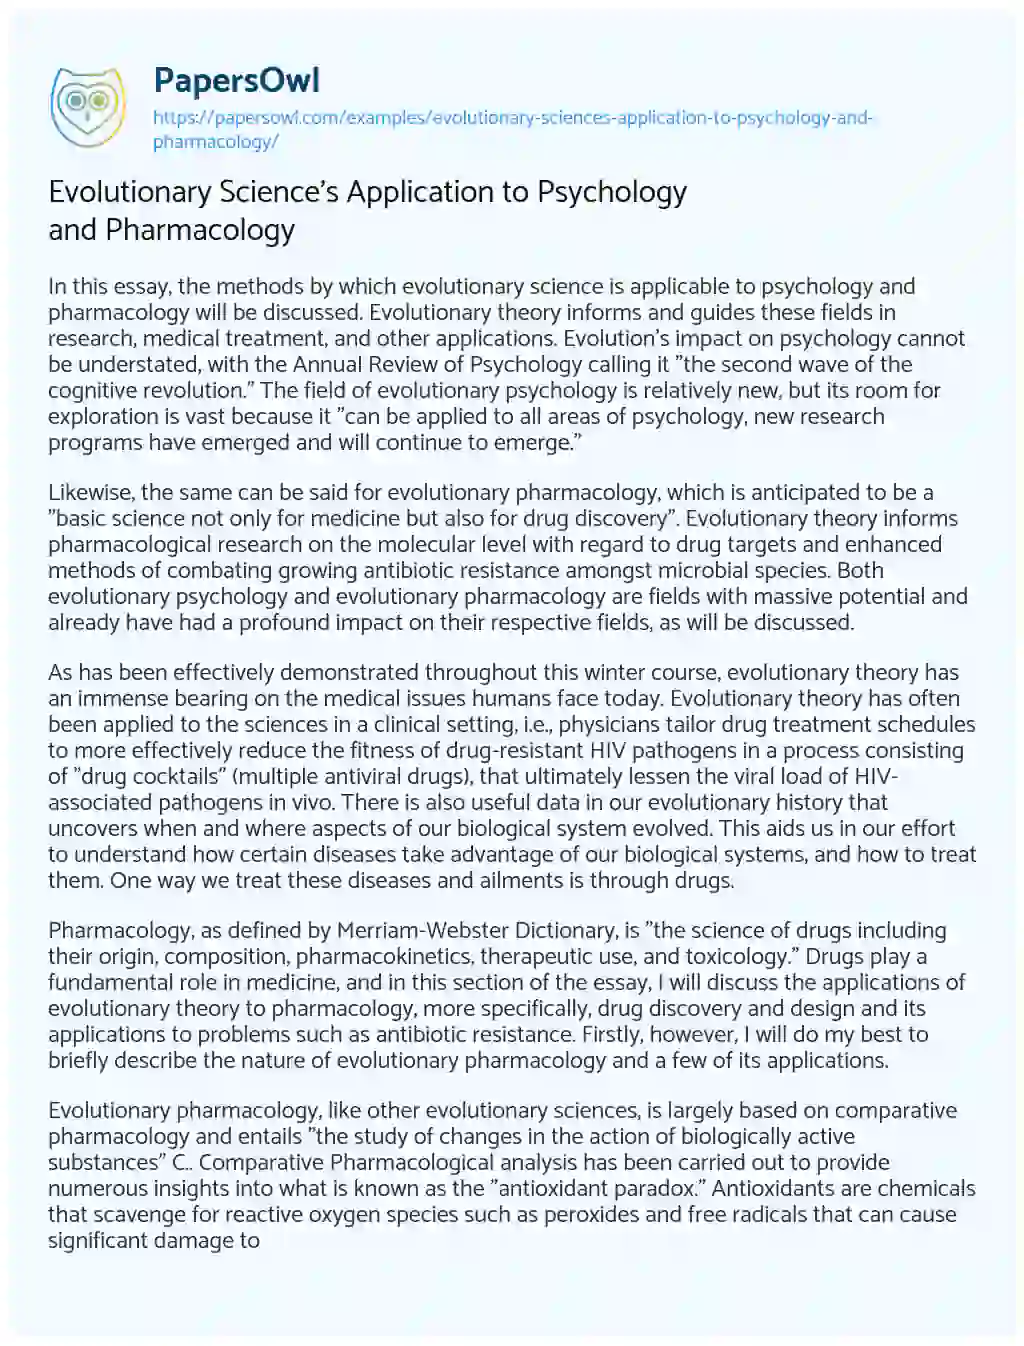 Essay on Evolutionary Science’s Application to Psychology and Pharmacology